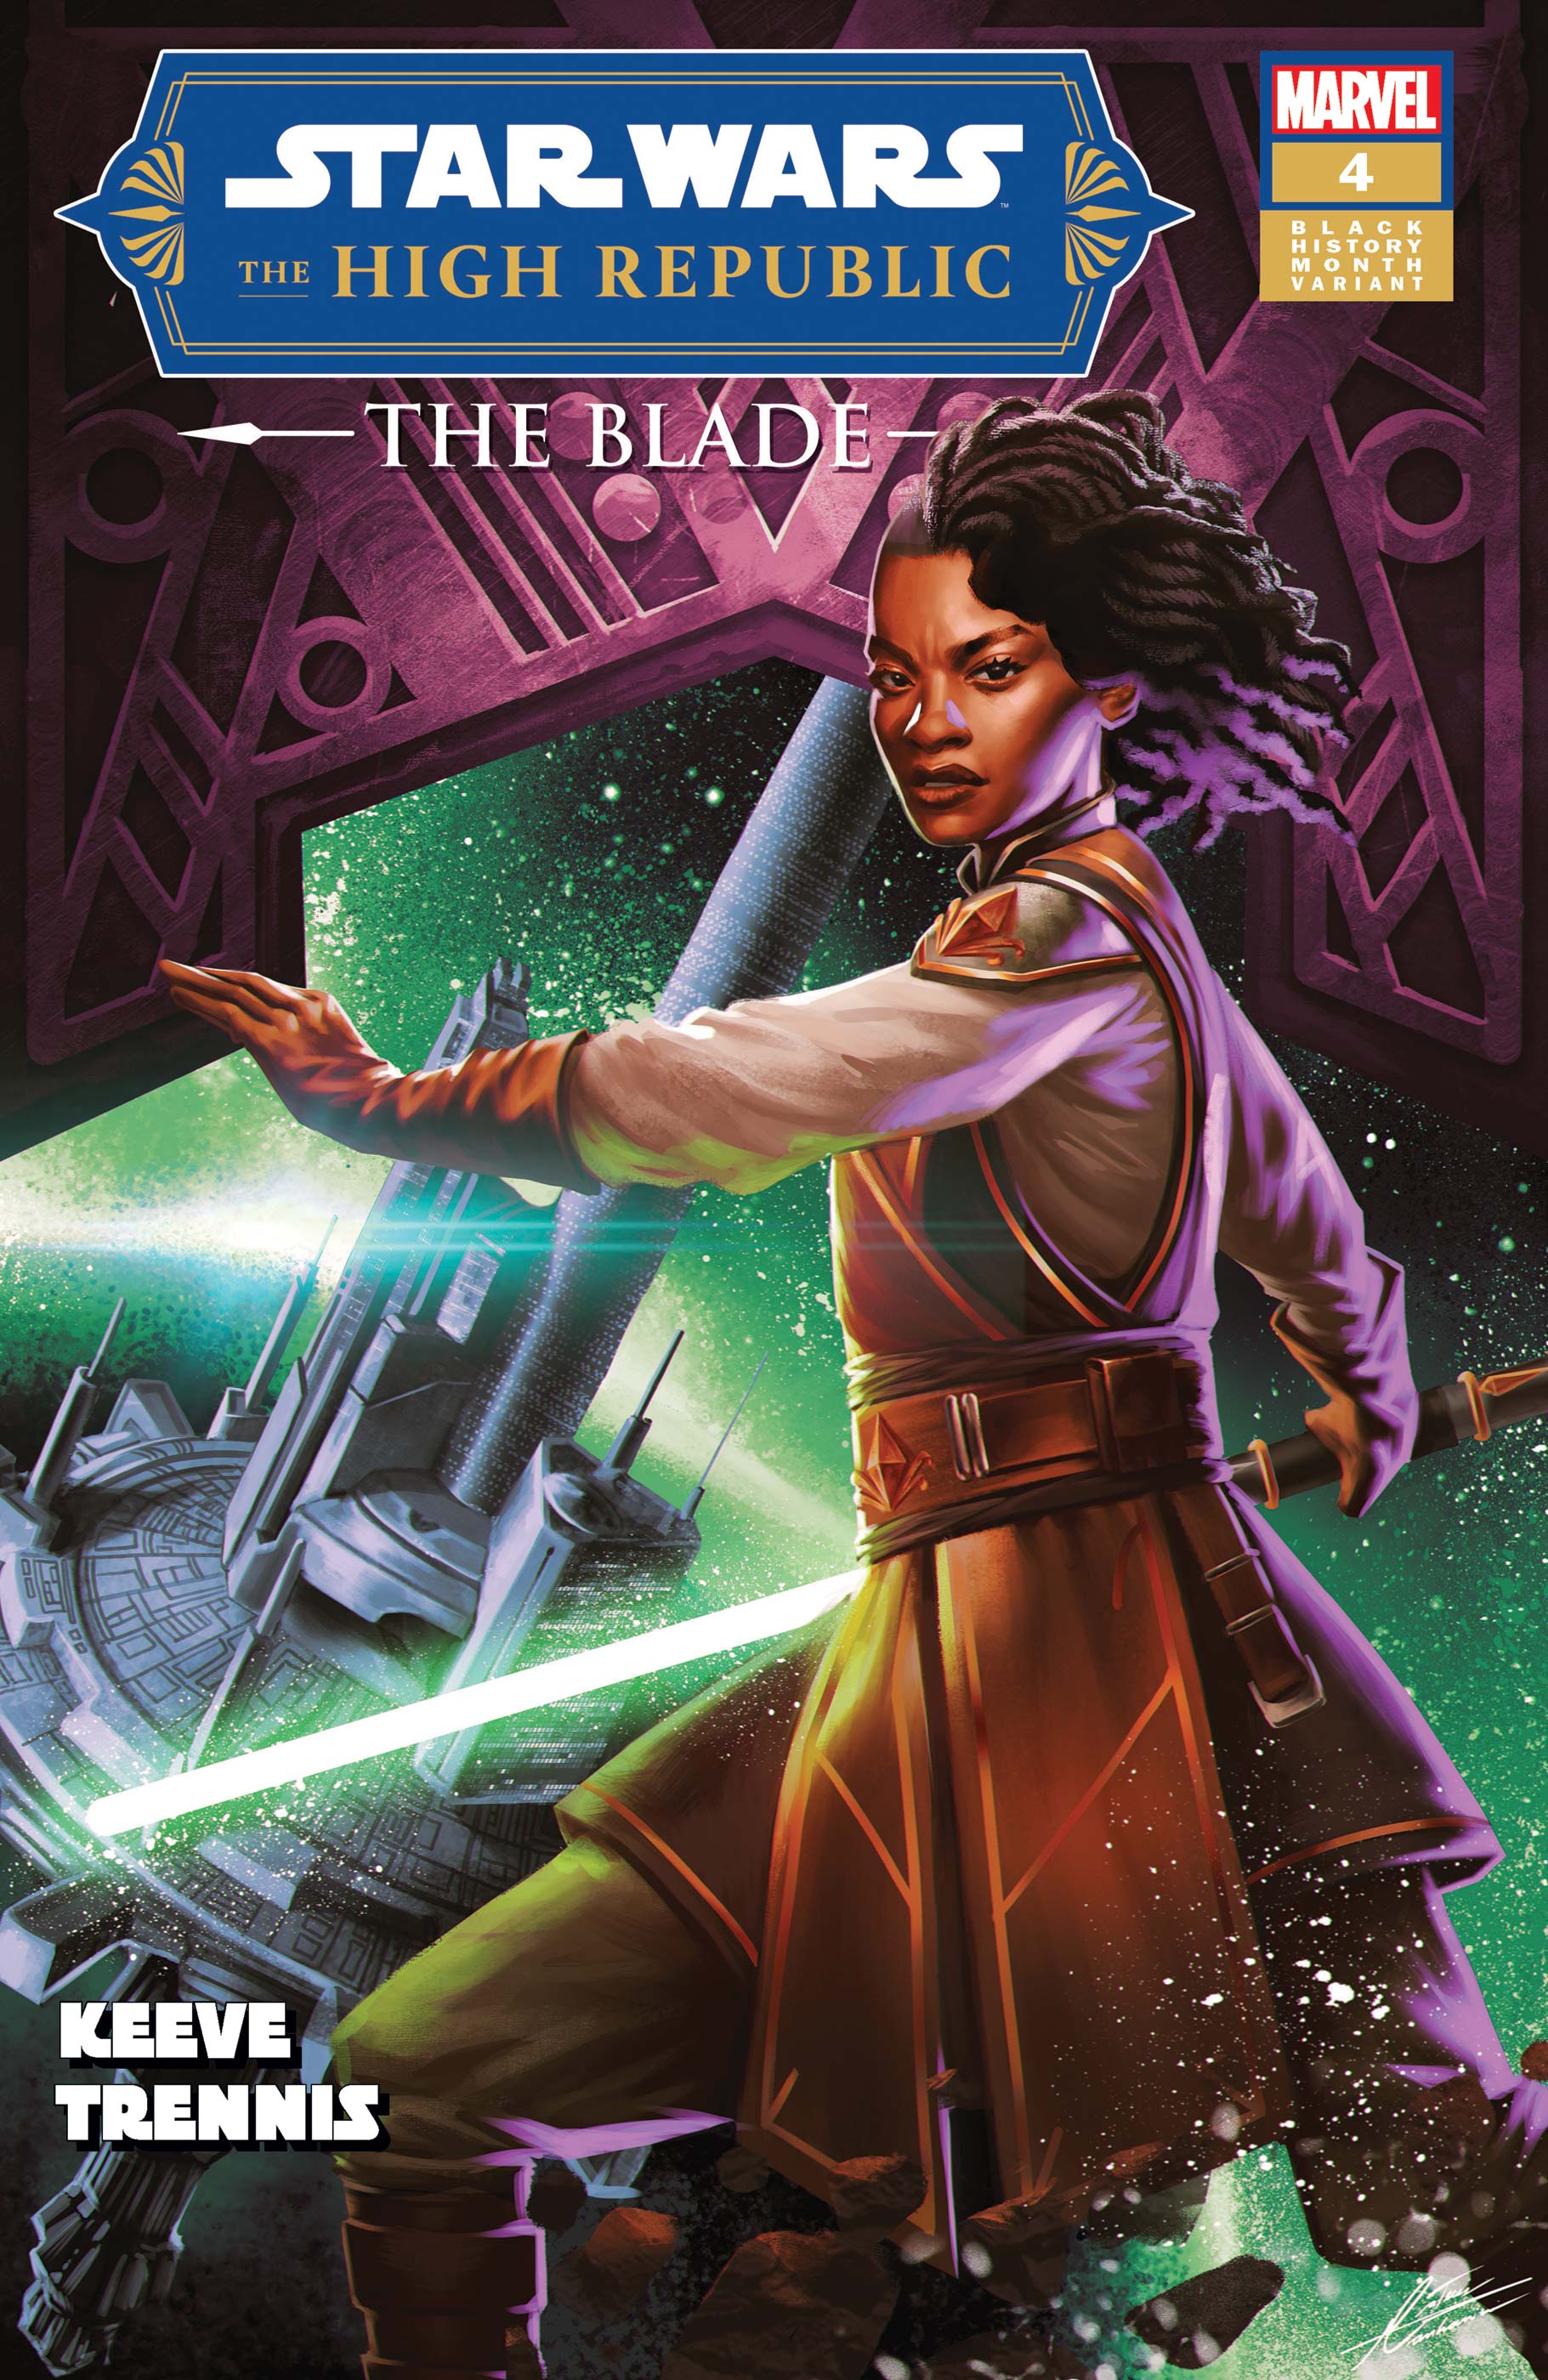 The High Republic: The Blade #4 (Mateus Manhanini "Keeve Trennis" Black History Month Variant Cover) (29.03.2023)